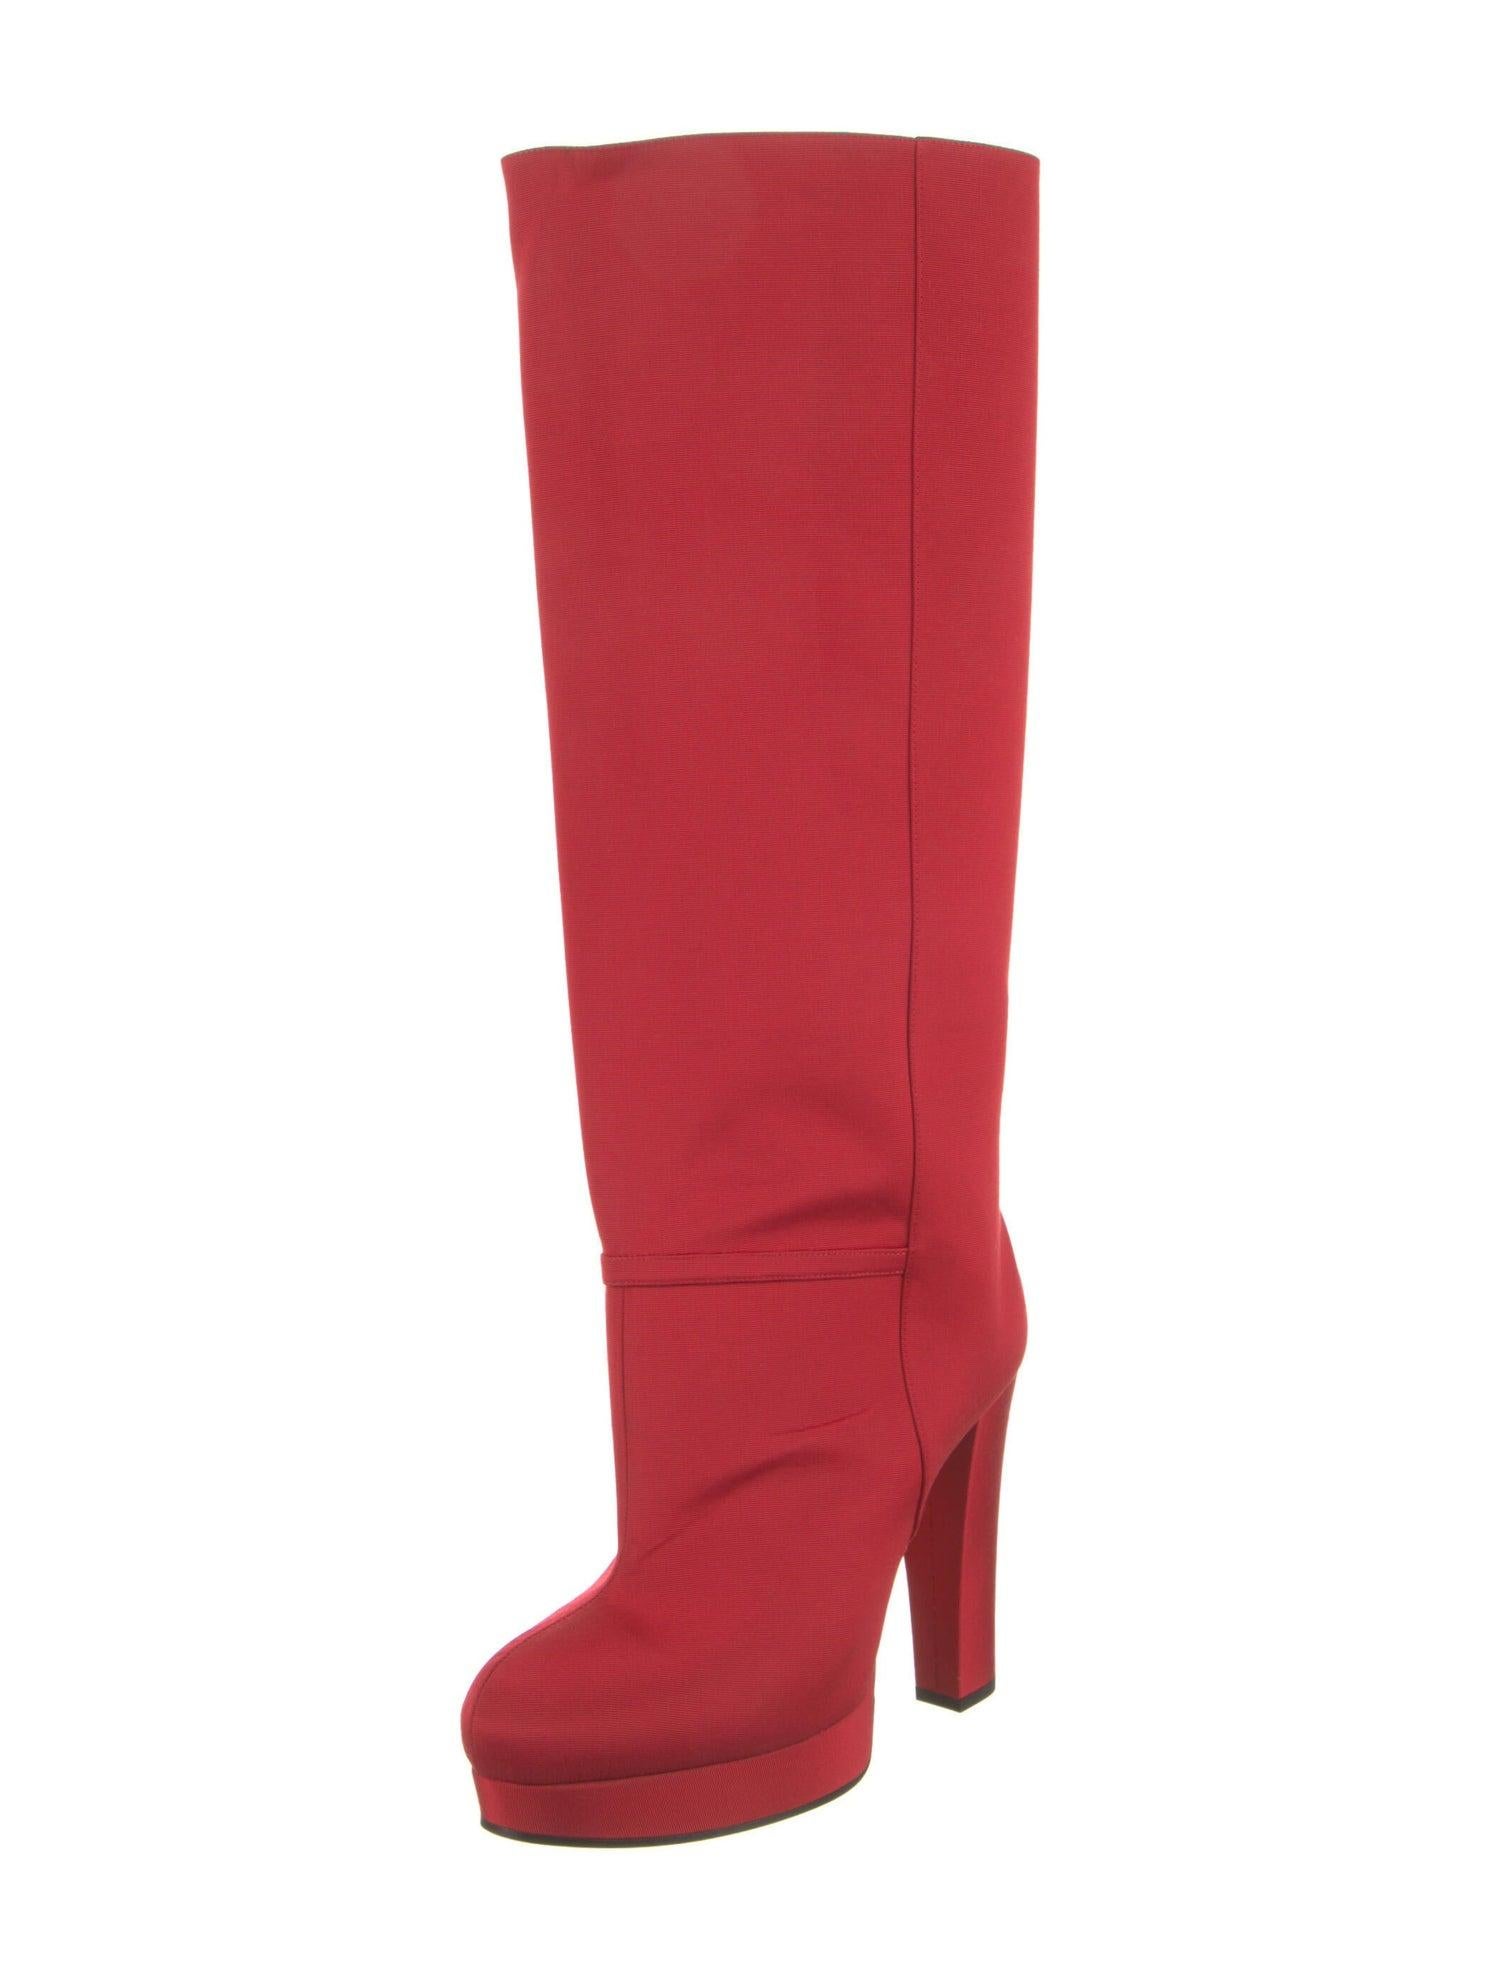 New With Box Gucci Fall 2019 Alessandro Michele Red Boots Sz 38 For Sale 12